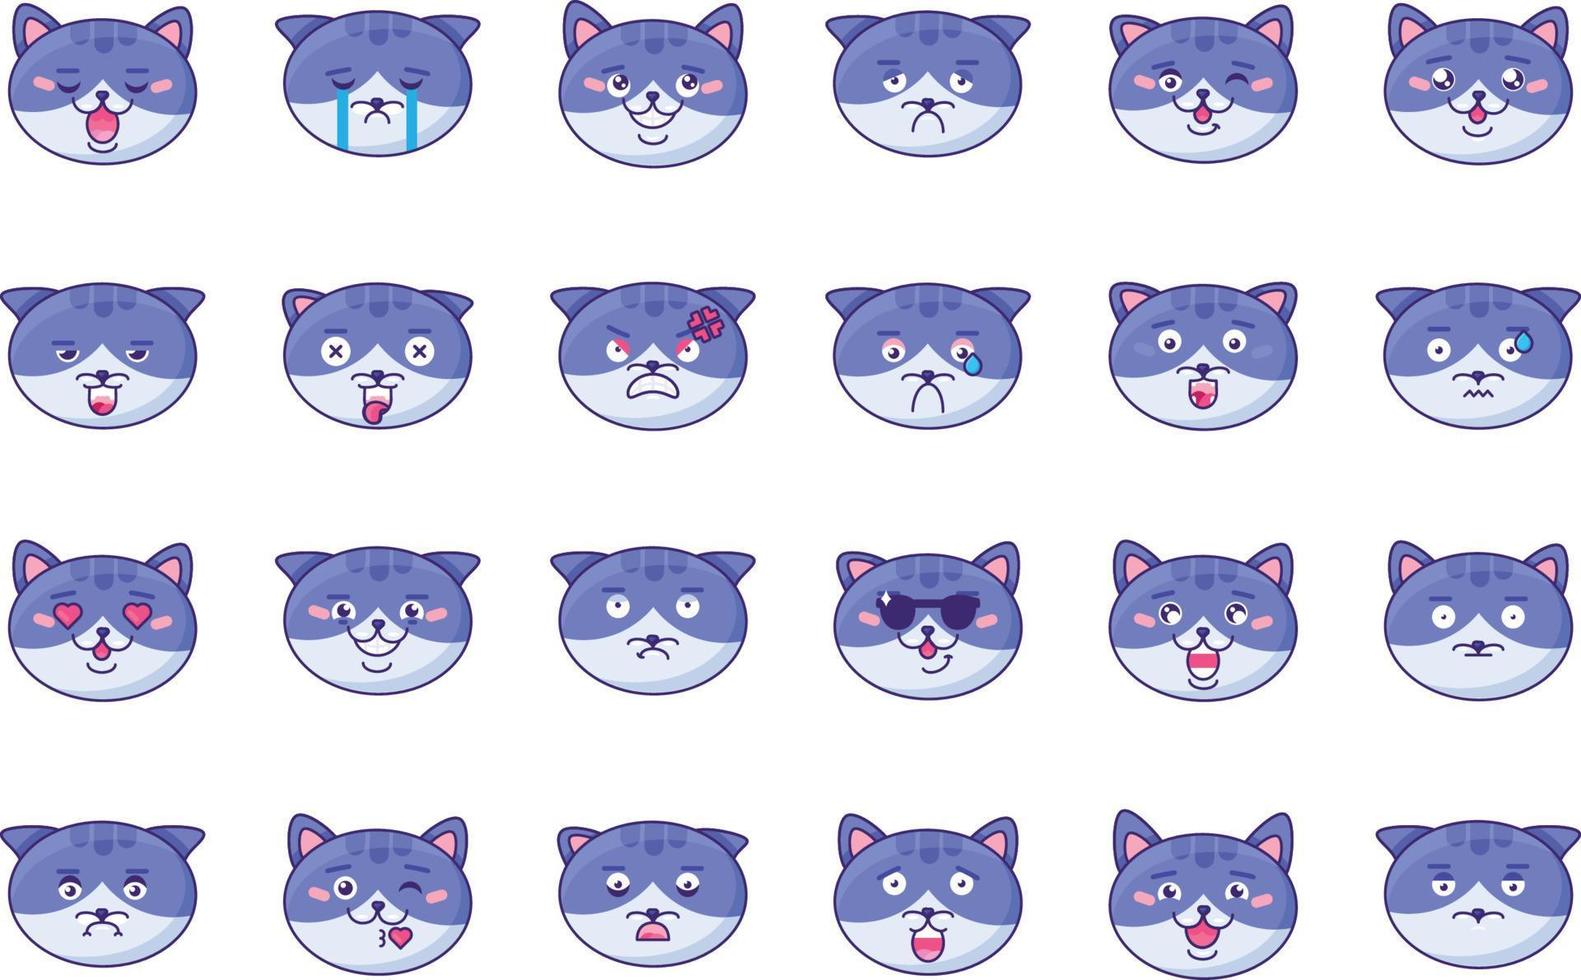 chat emoji humeur différente collection set vector